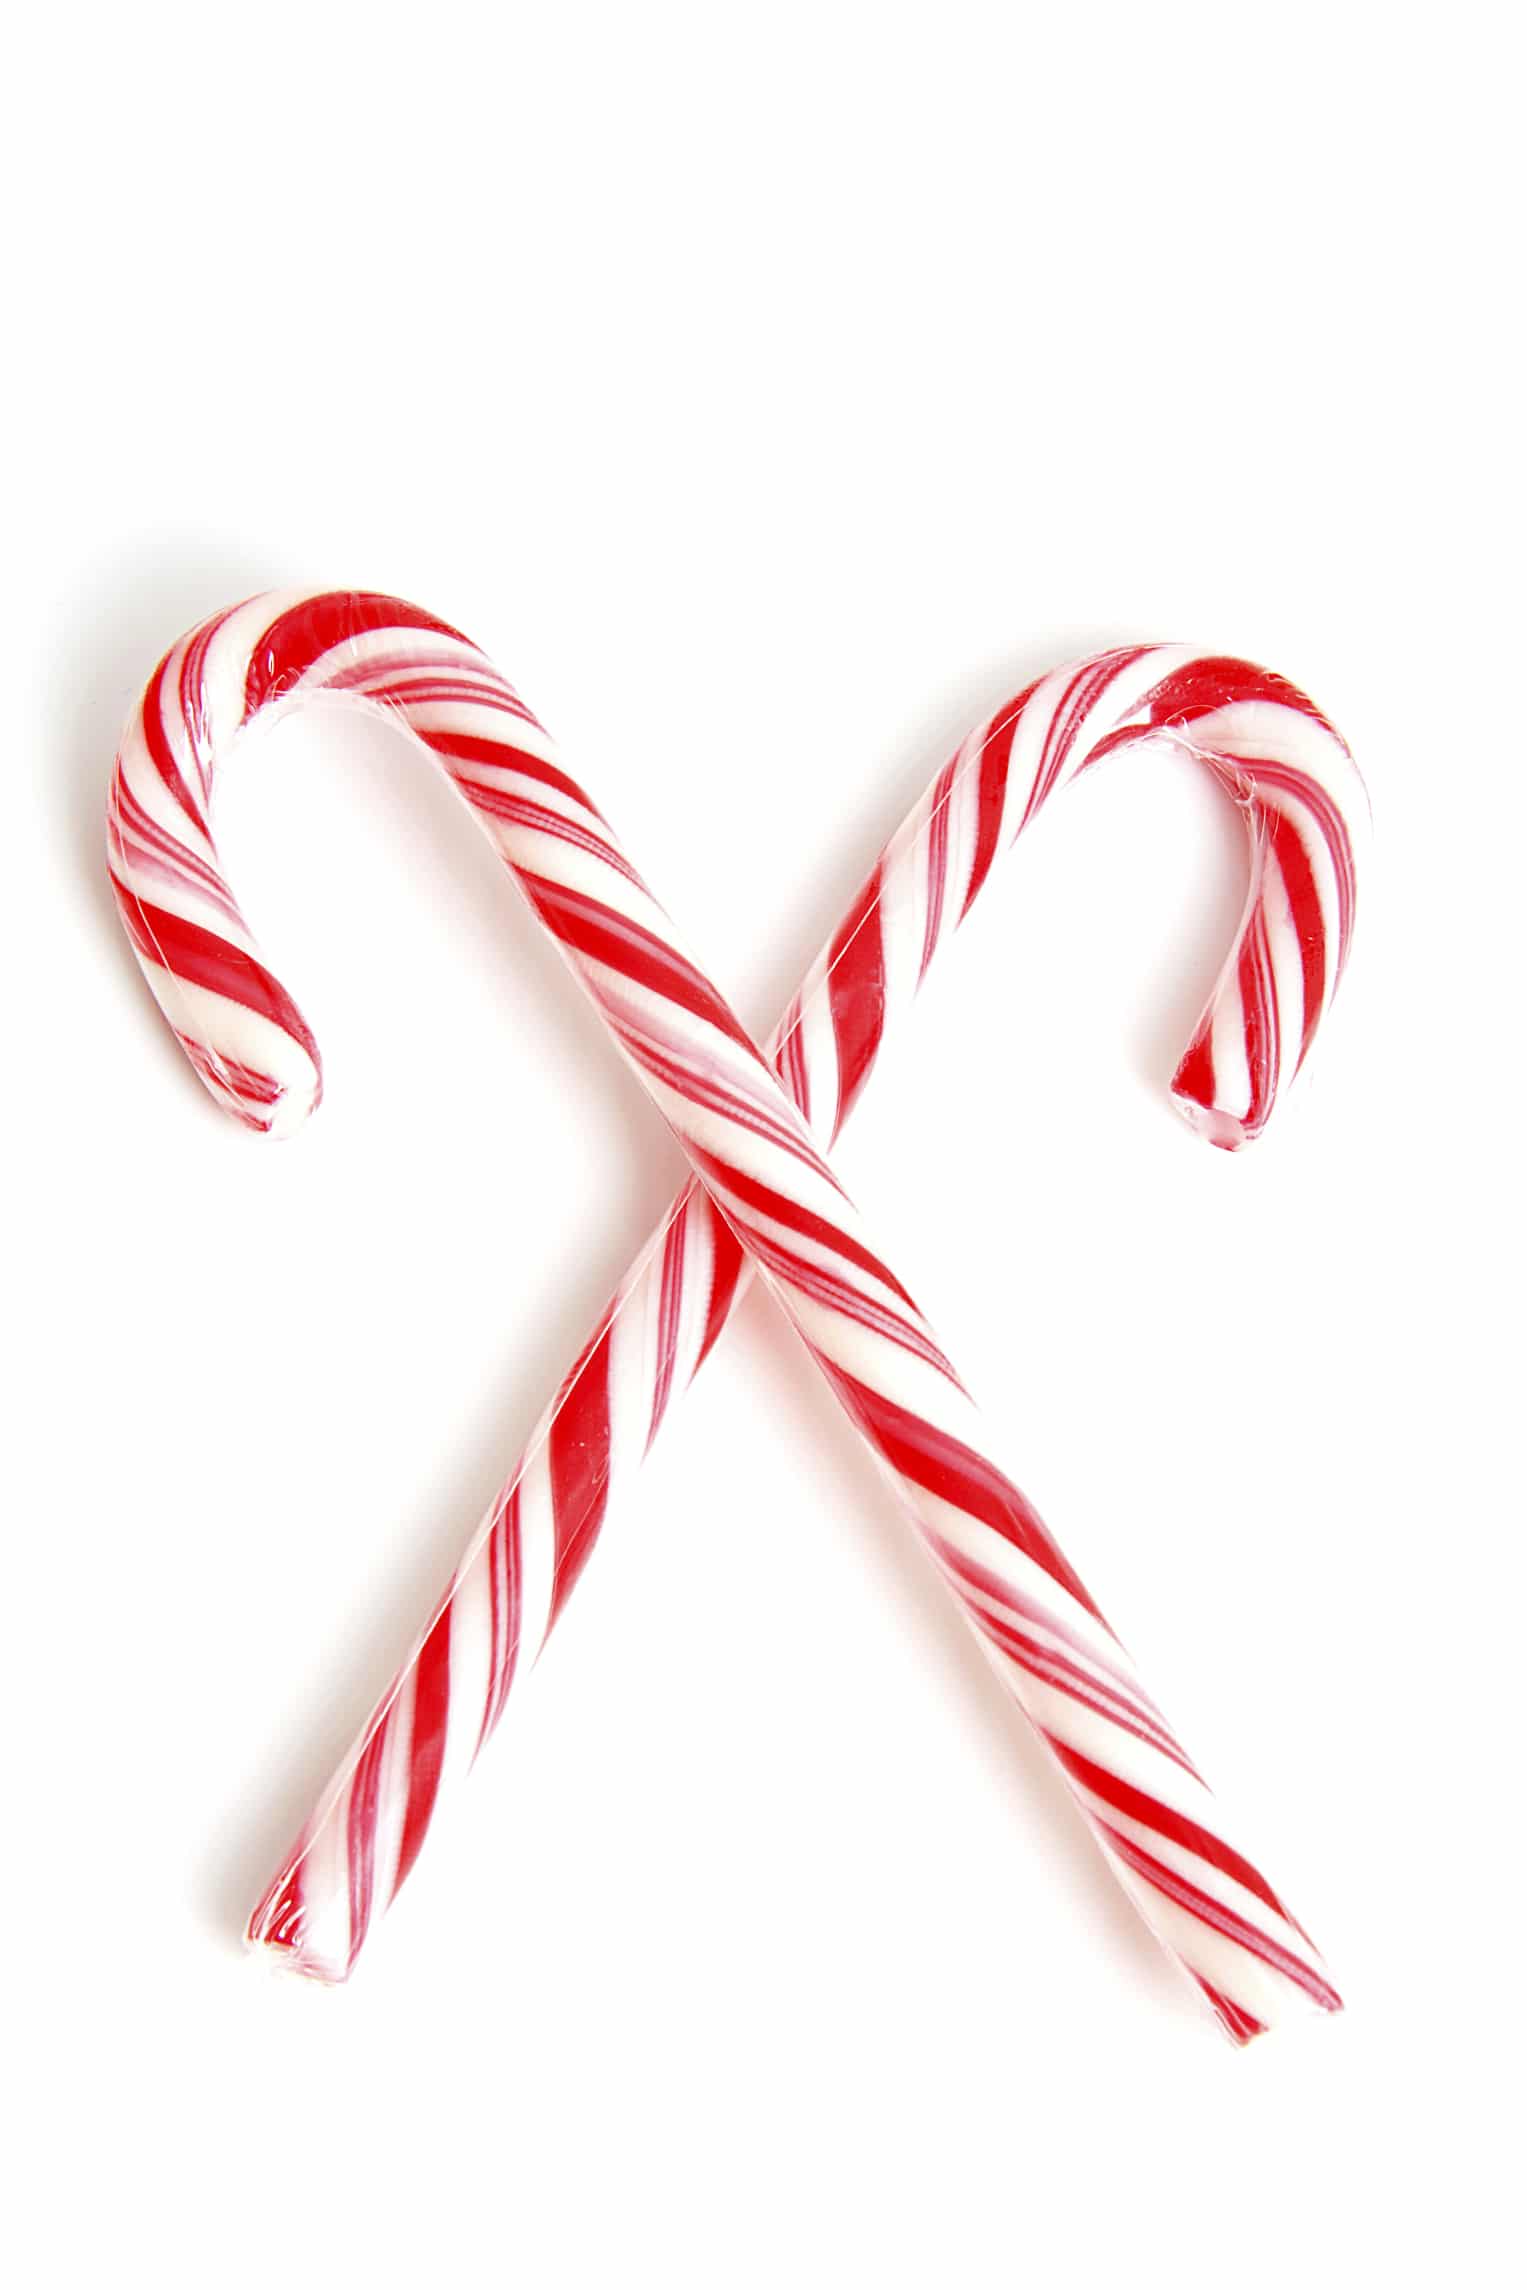 Traditional christmas candy cane  isolated on white background